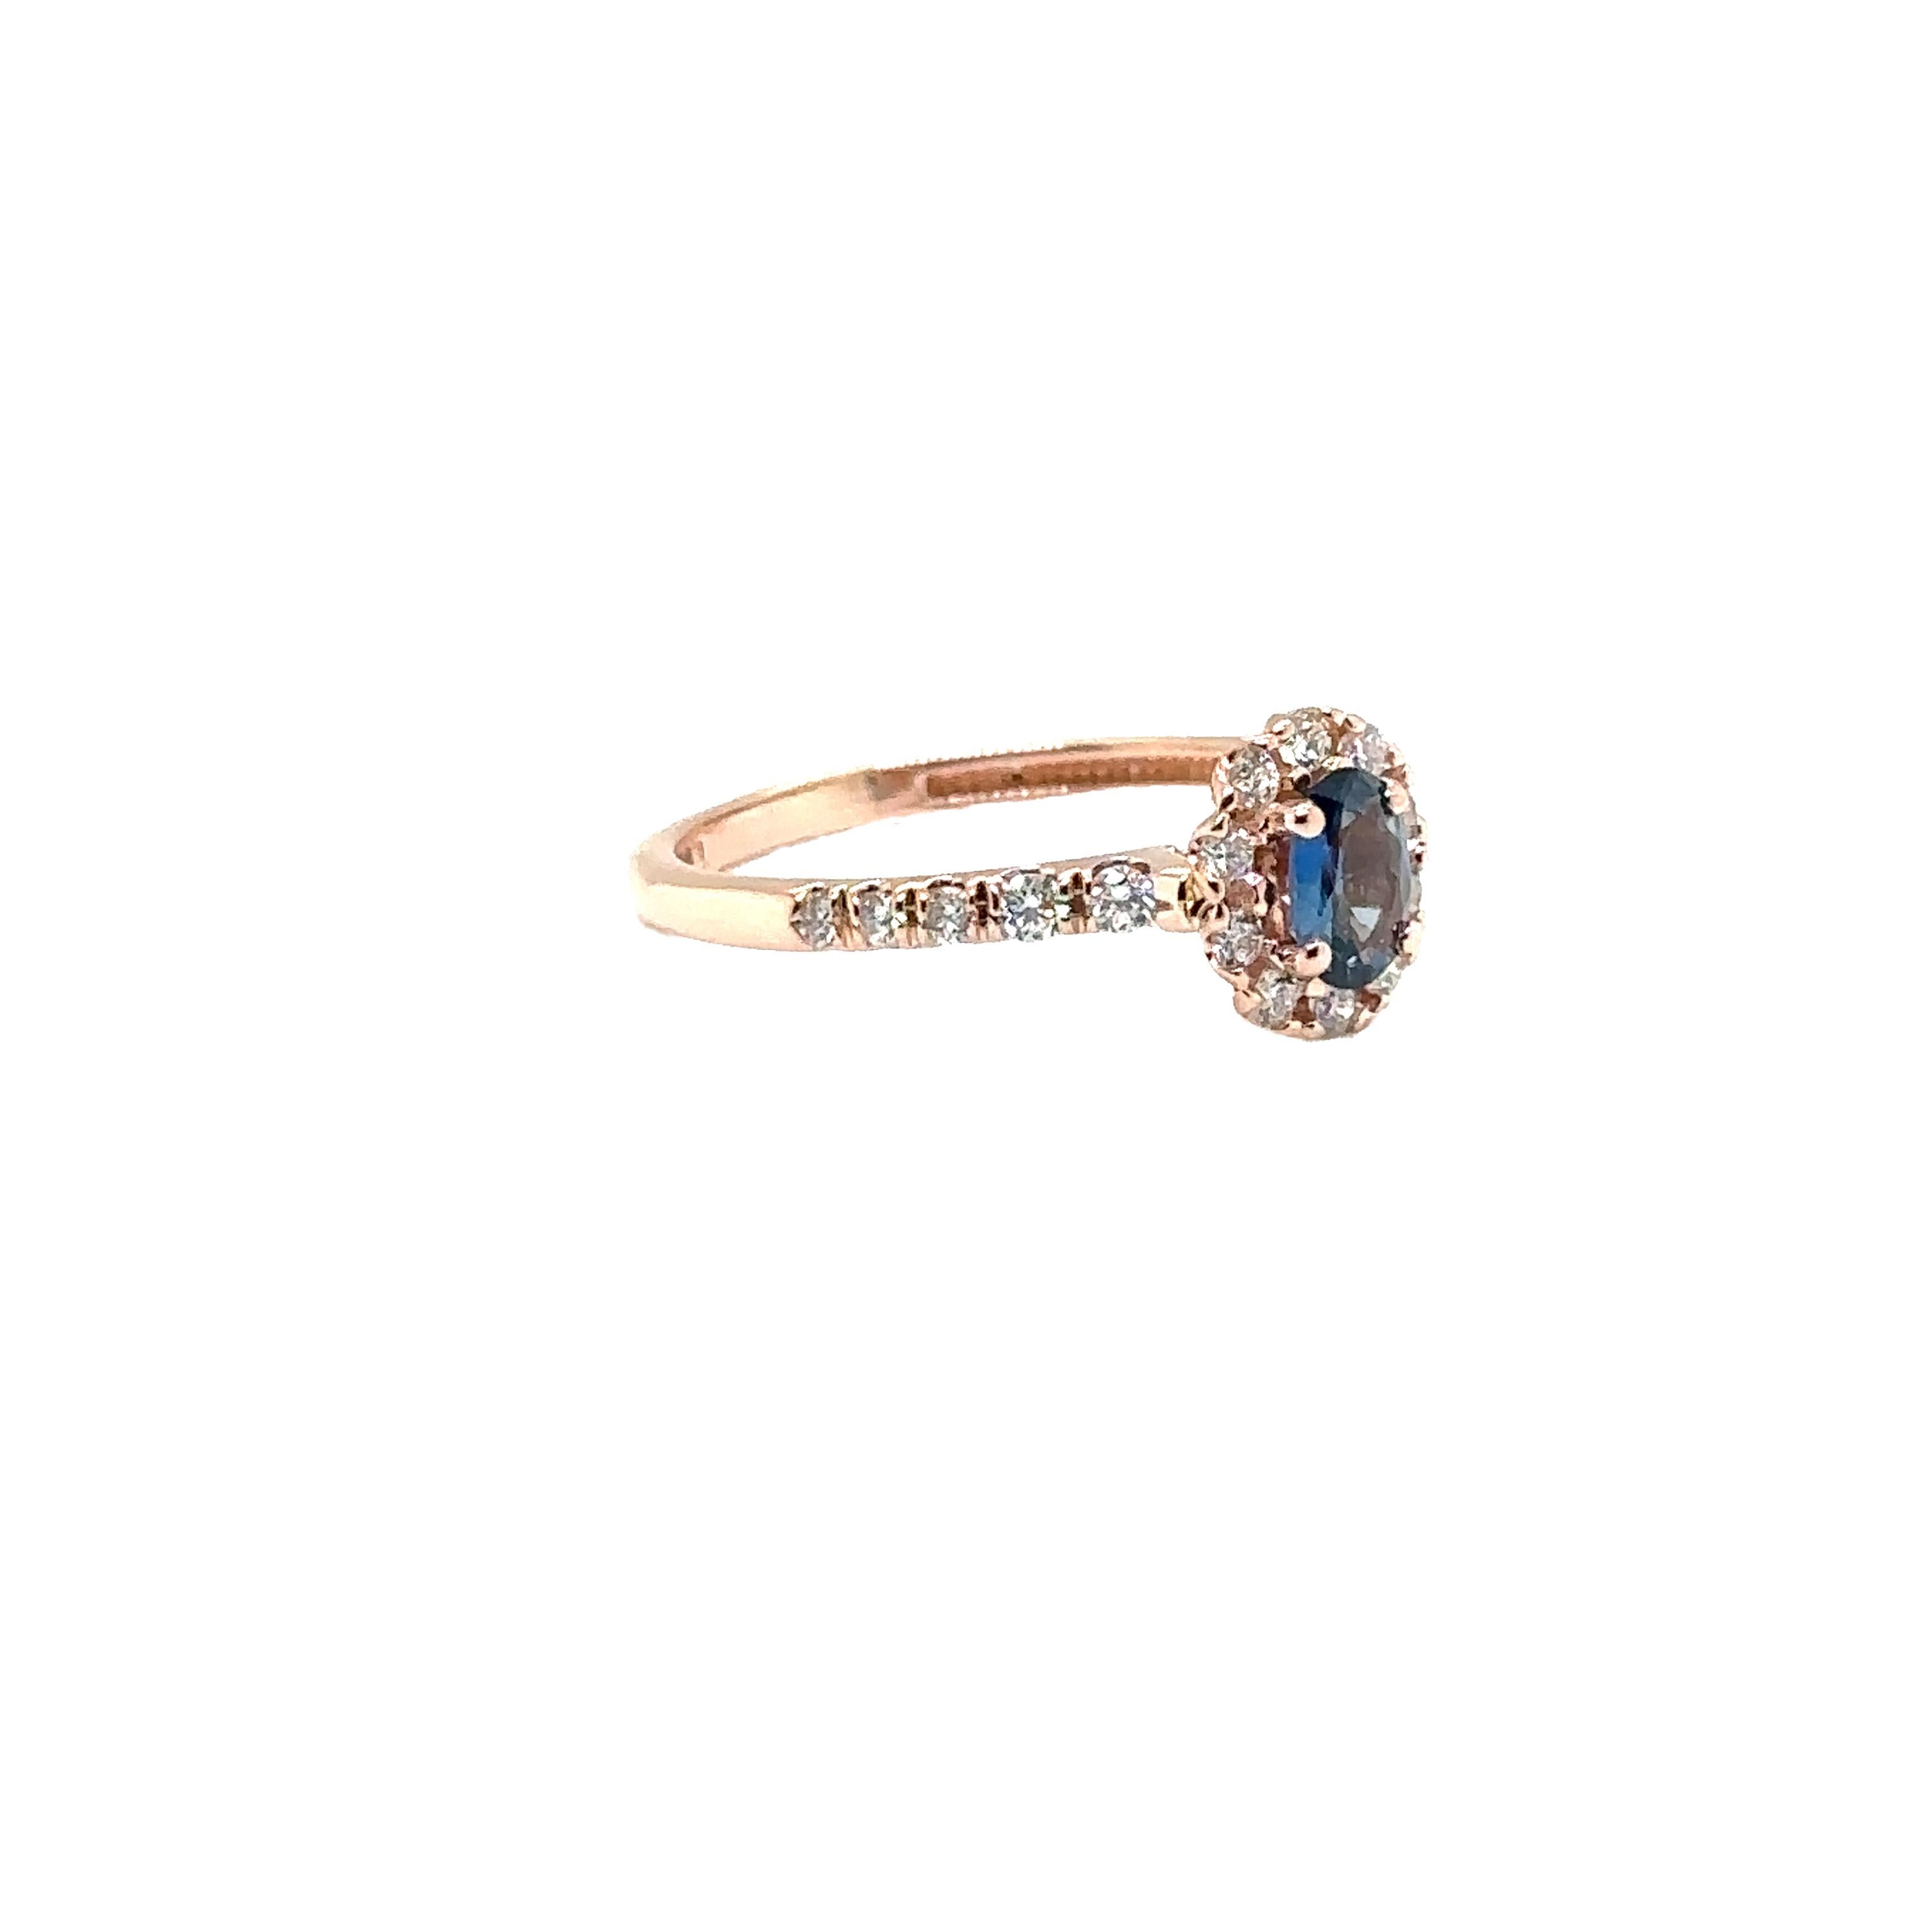 JAS-21-2235 - 14K ROSE GOLD OVAL SAPPHIRE RING with DIAMONDS For Sale 5